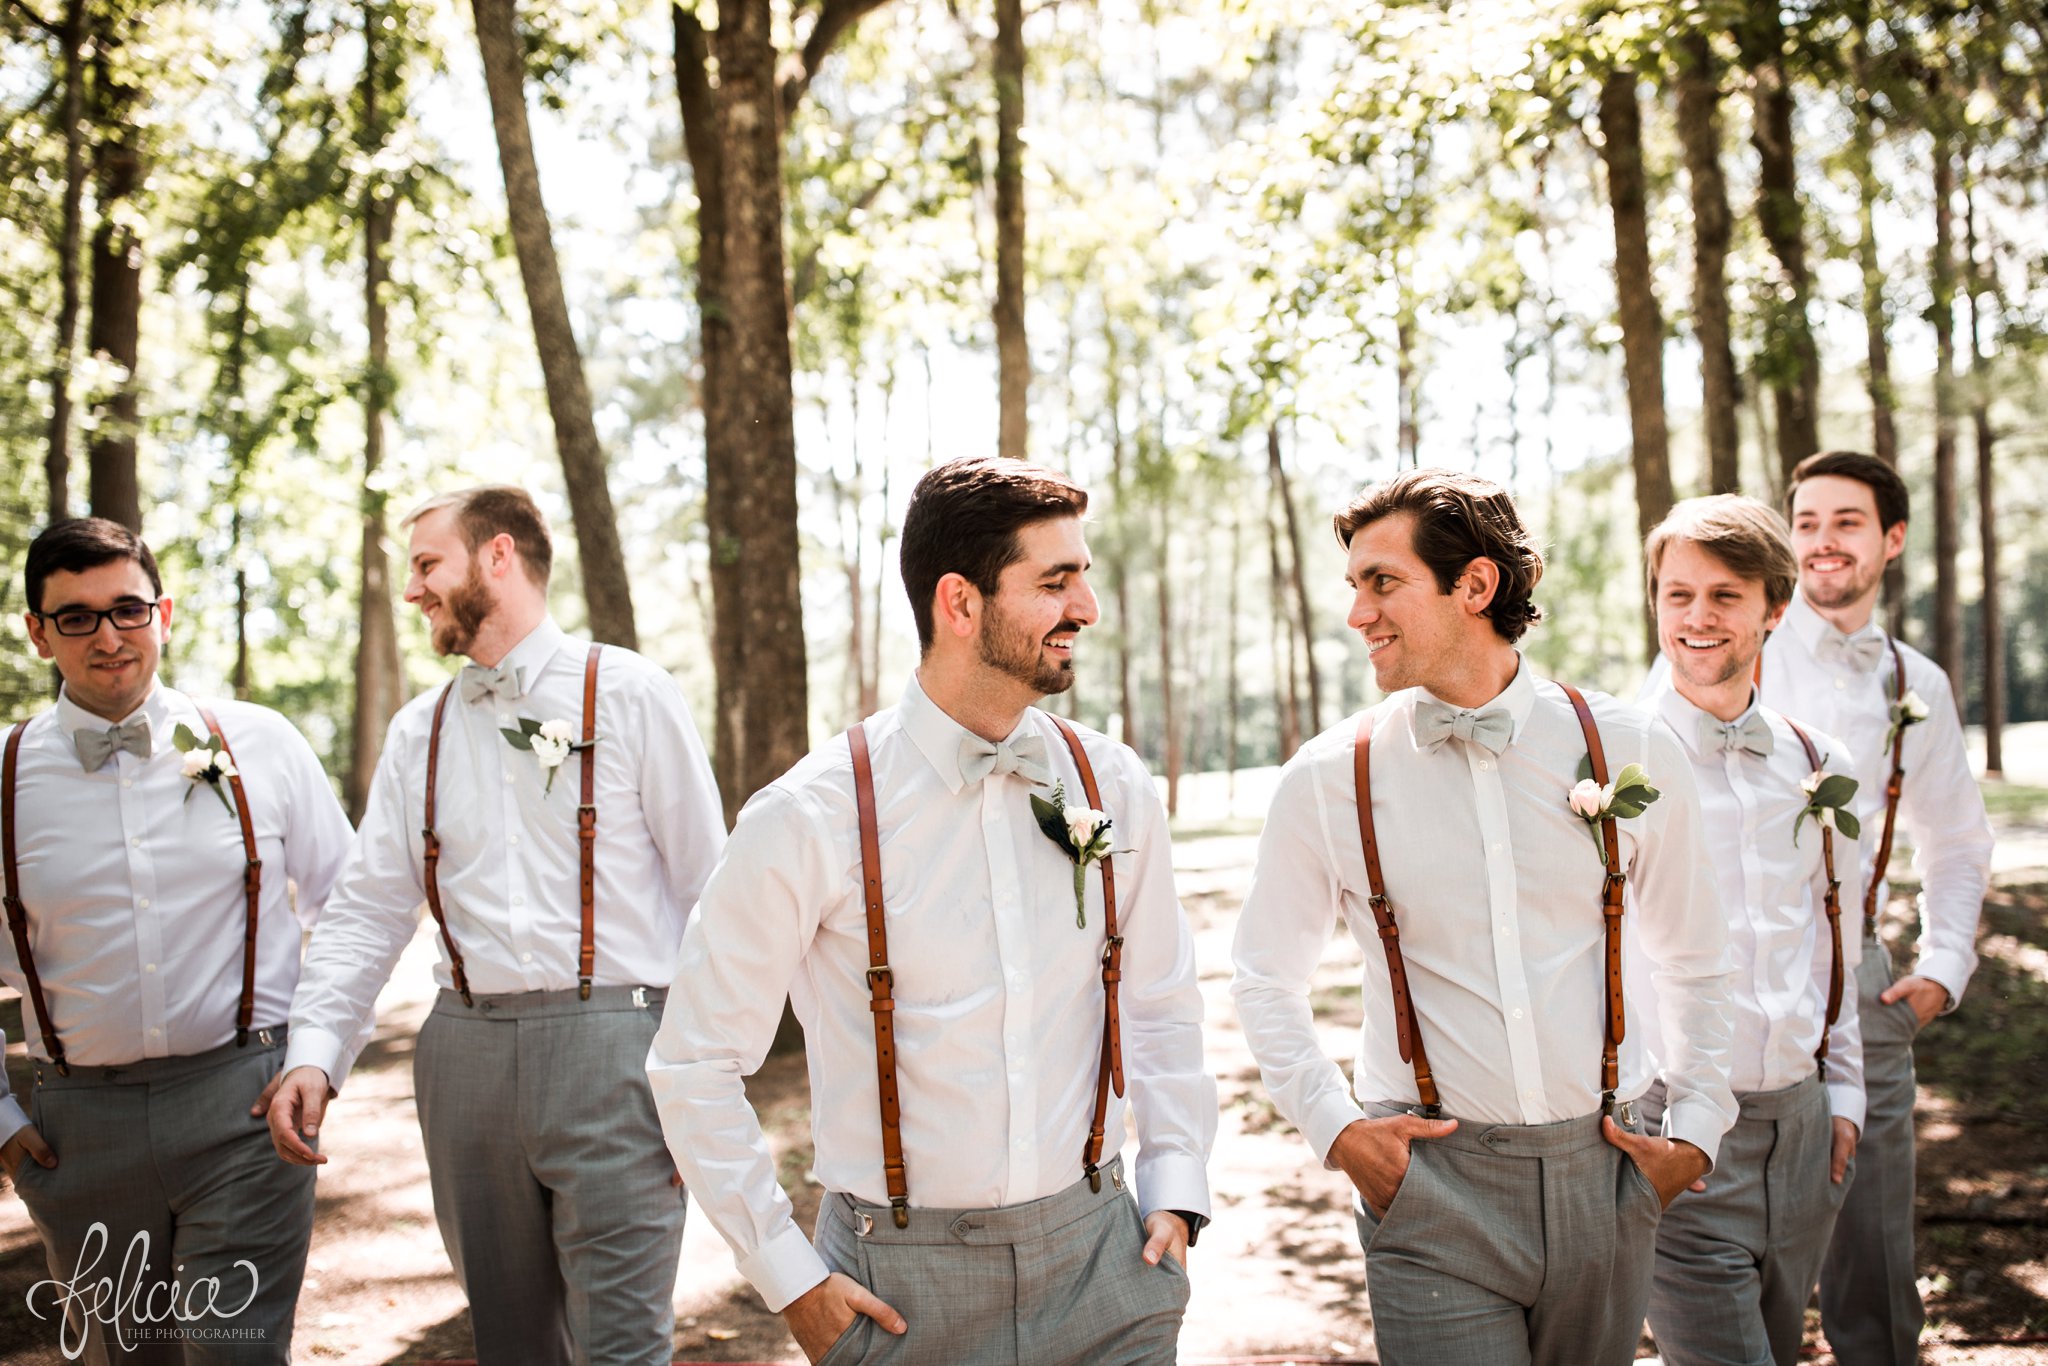 images by feliciathephotographer.com | destination wedding | the makey house | dave gibson coordinator | travel photographer | Savannah, georgia | southern | portrait | groomsmen | game face | pre-ceremony | trees | forest | brown hipster shoes | suspenders | bow ties | green | laughter | walking 